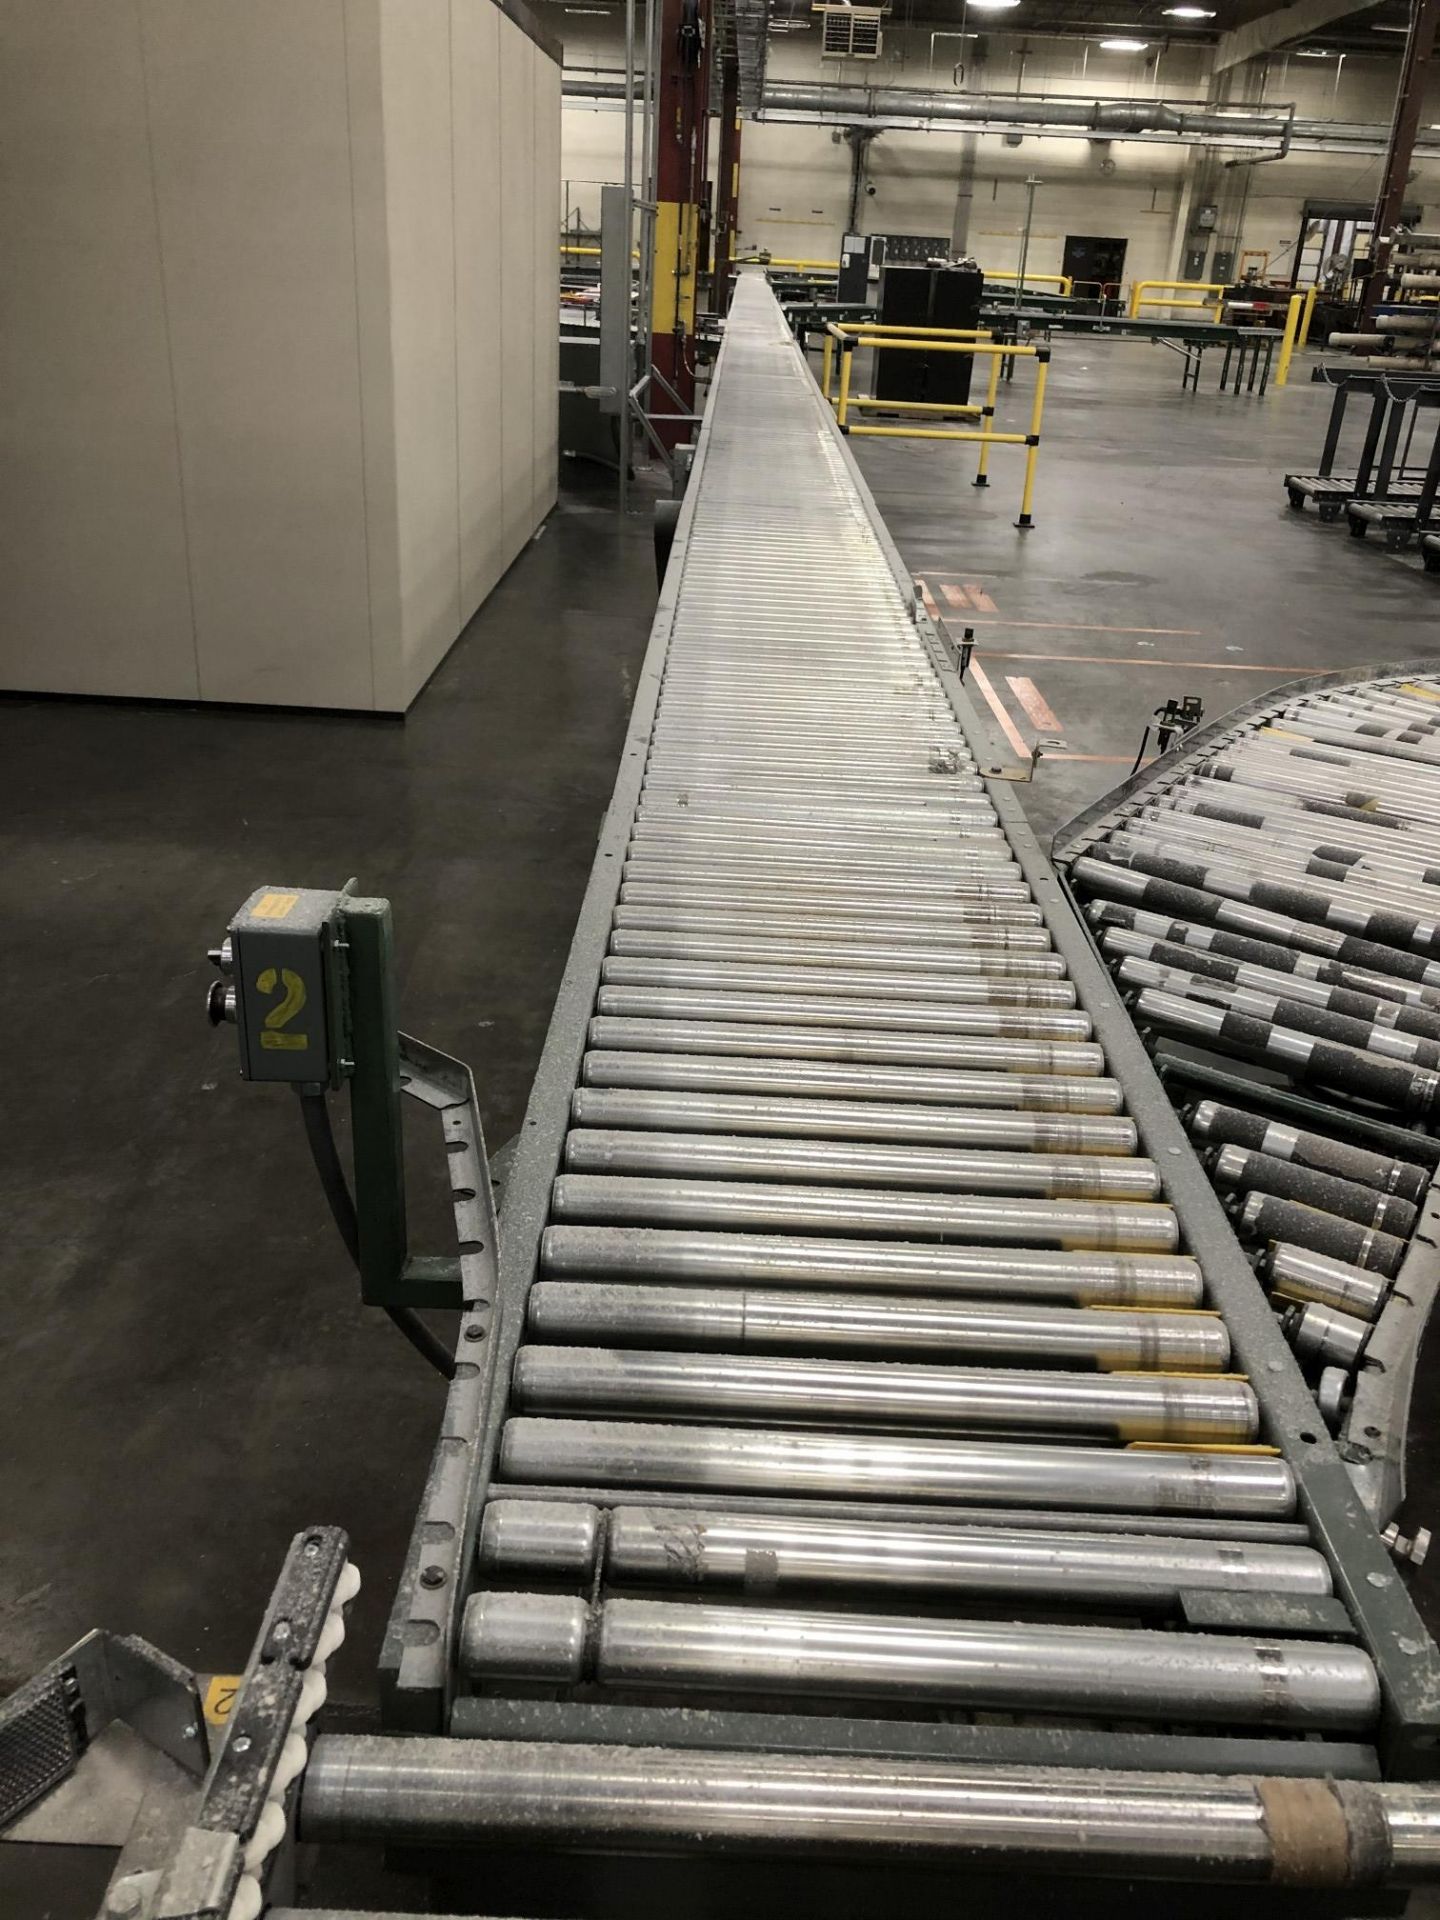 All Hytrol Conveyor Throughout Entire Site, Mostly 20" Wide Powered Roller Conveyor [Please - Image 54 of 80